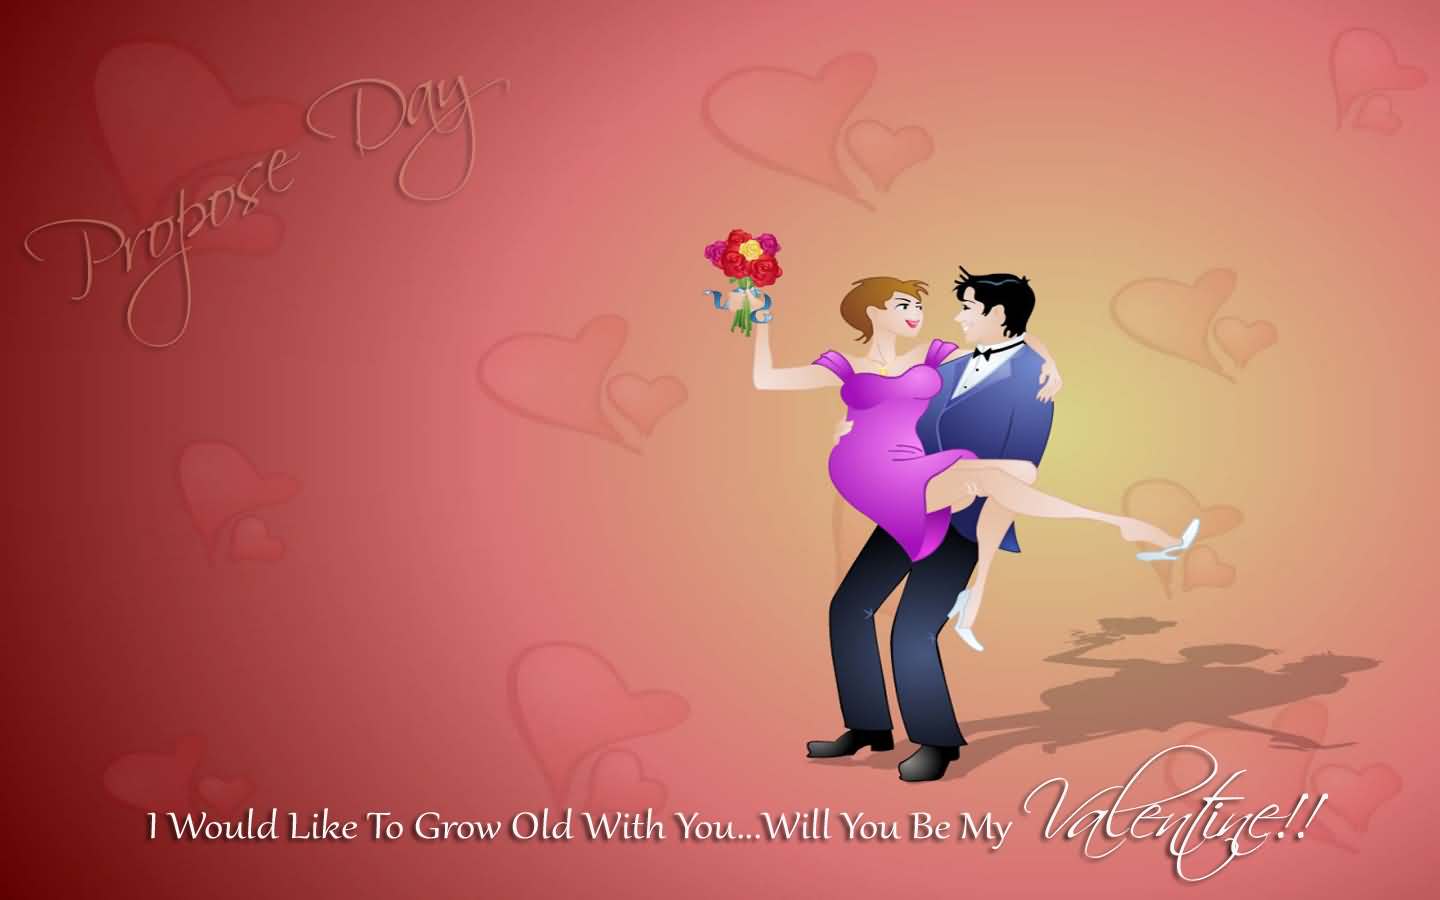 50 Best Propose Day 2018 Greeting Picture Ideas